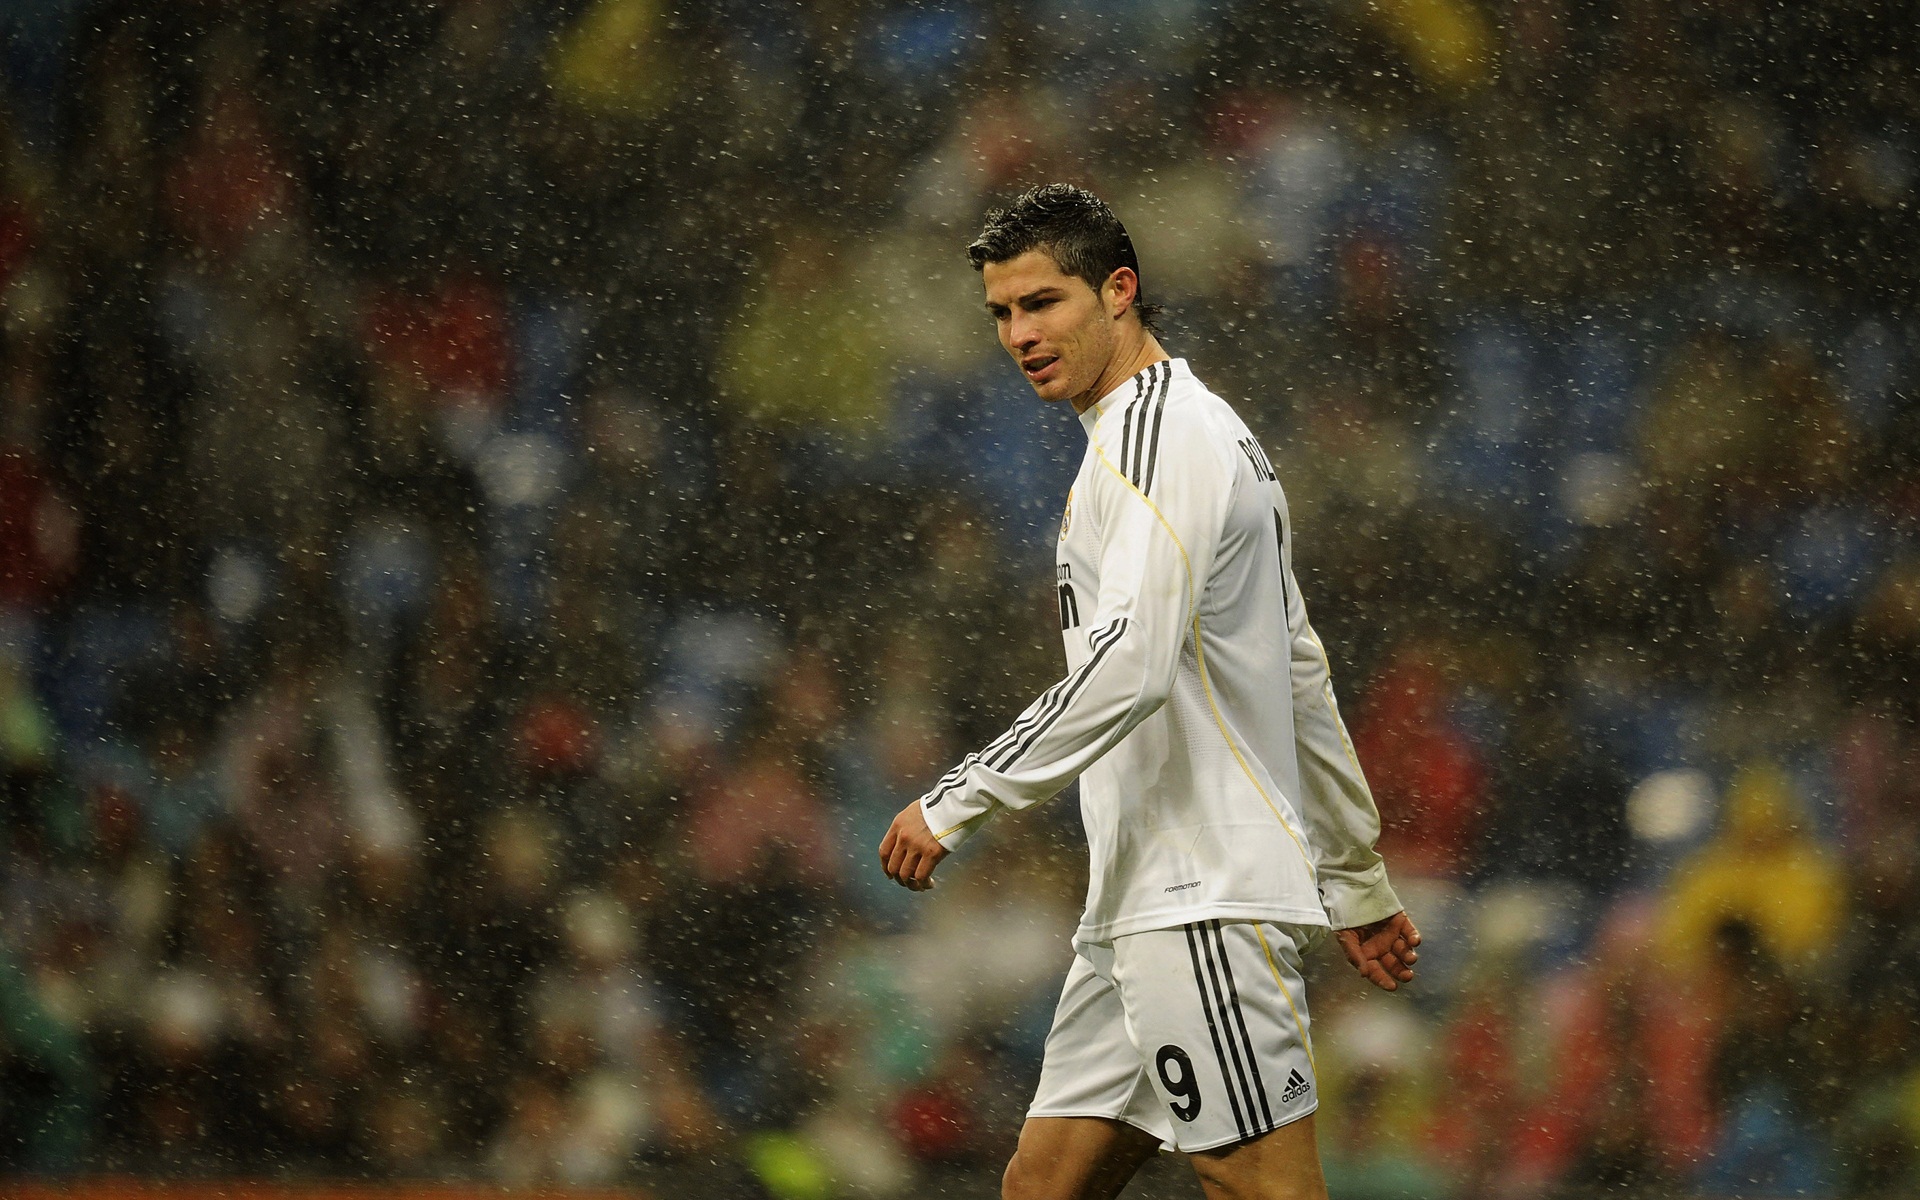 Cristiano Wallpapers Photos And Desktop Backgrounds Up To 8K